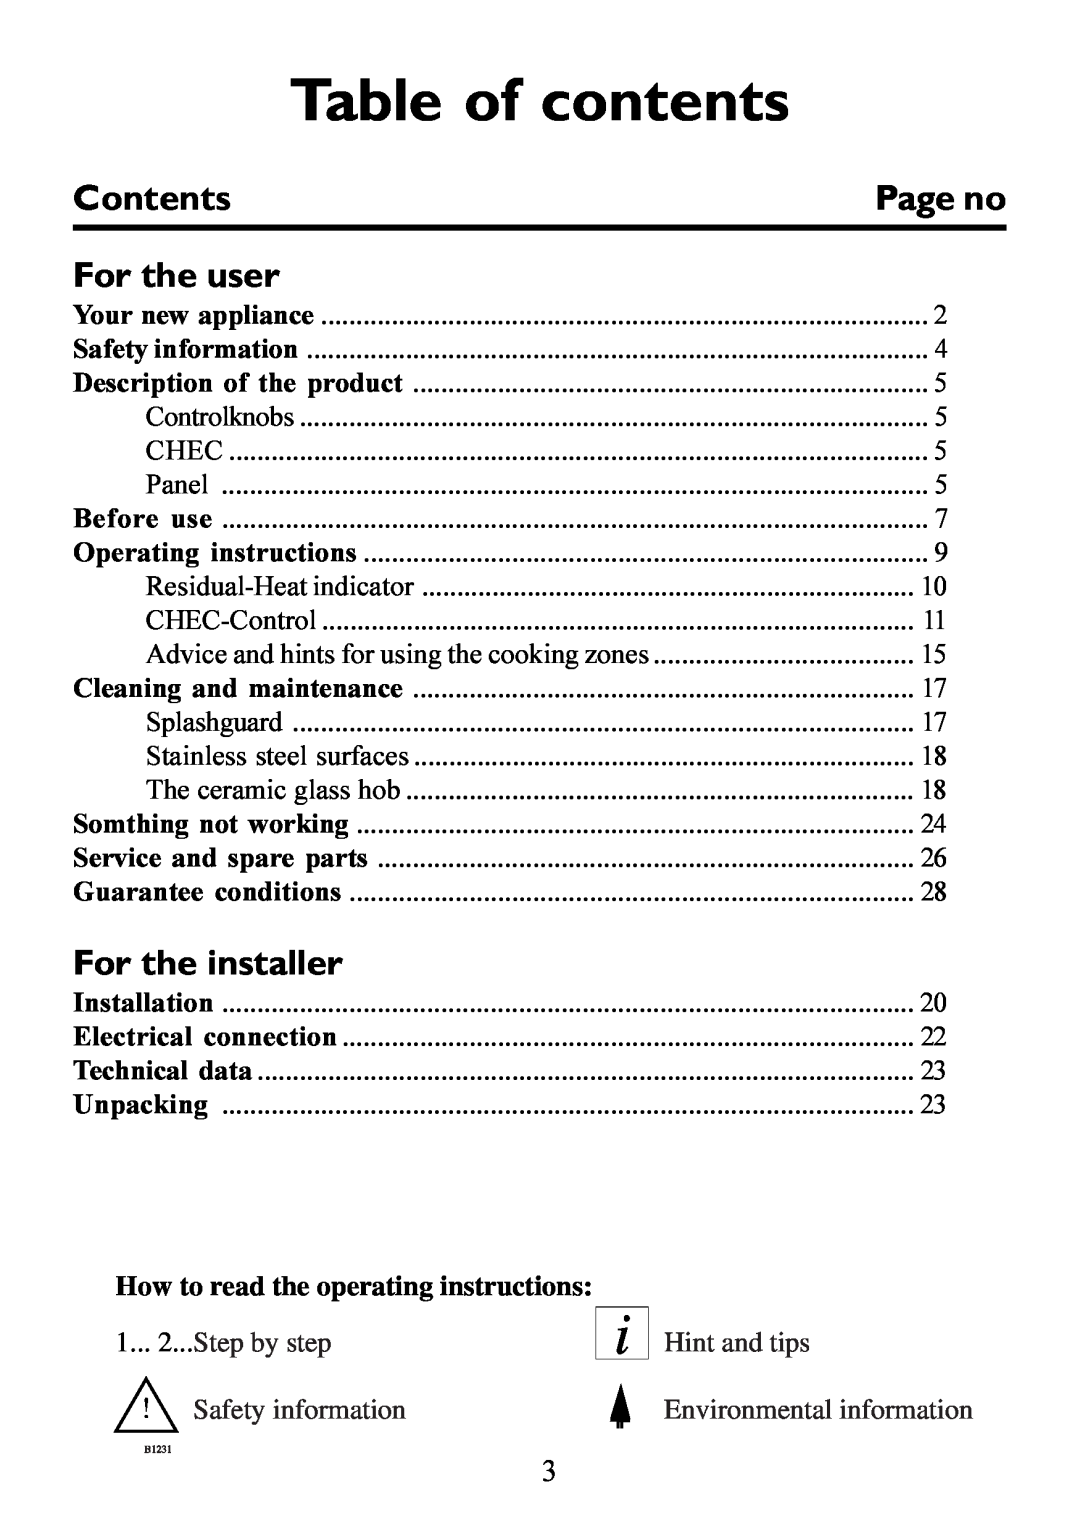 Electrolux Ceramic glass hob Table of contents, How to read the operating instructions, Contents, For the user, Page no 